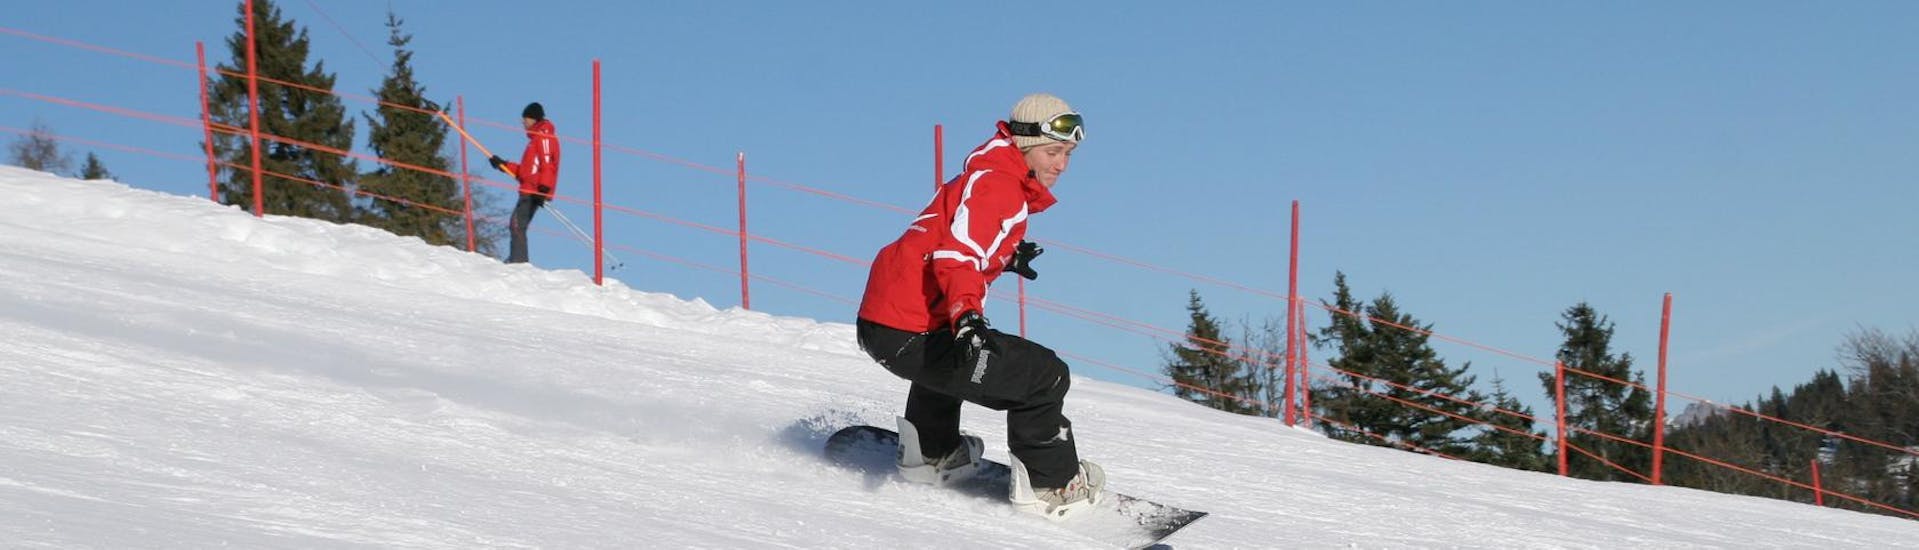 A Snowboarder rides down the slopes during his private snowboarding lessons for kids and adults of all levels with the Busslehner Ski School.